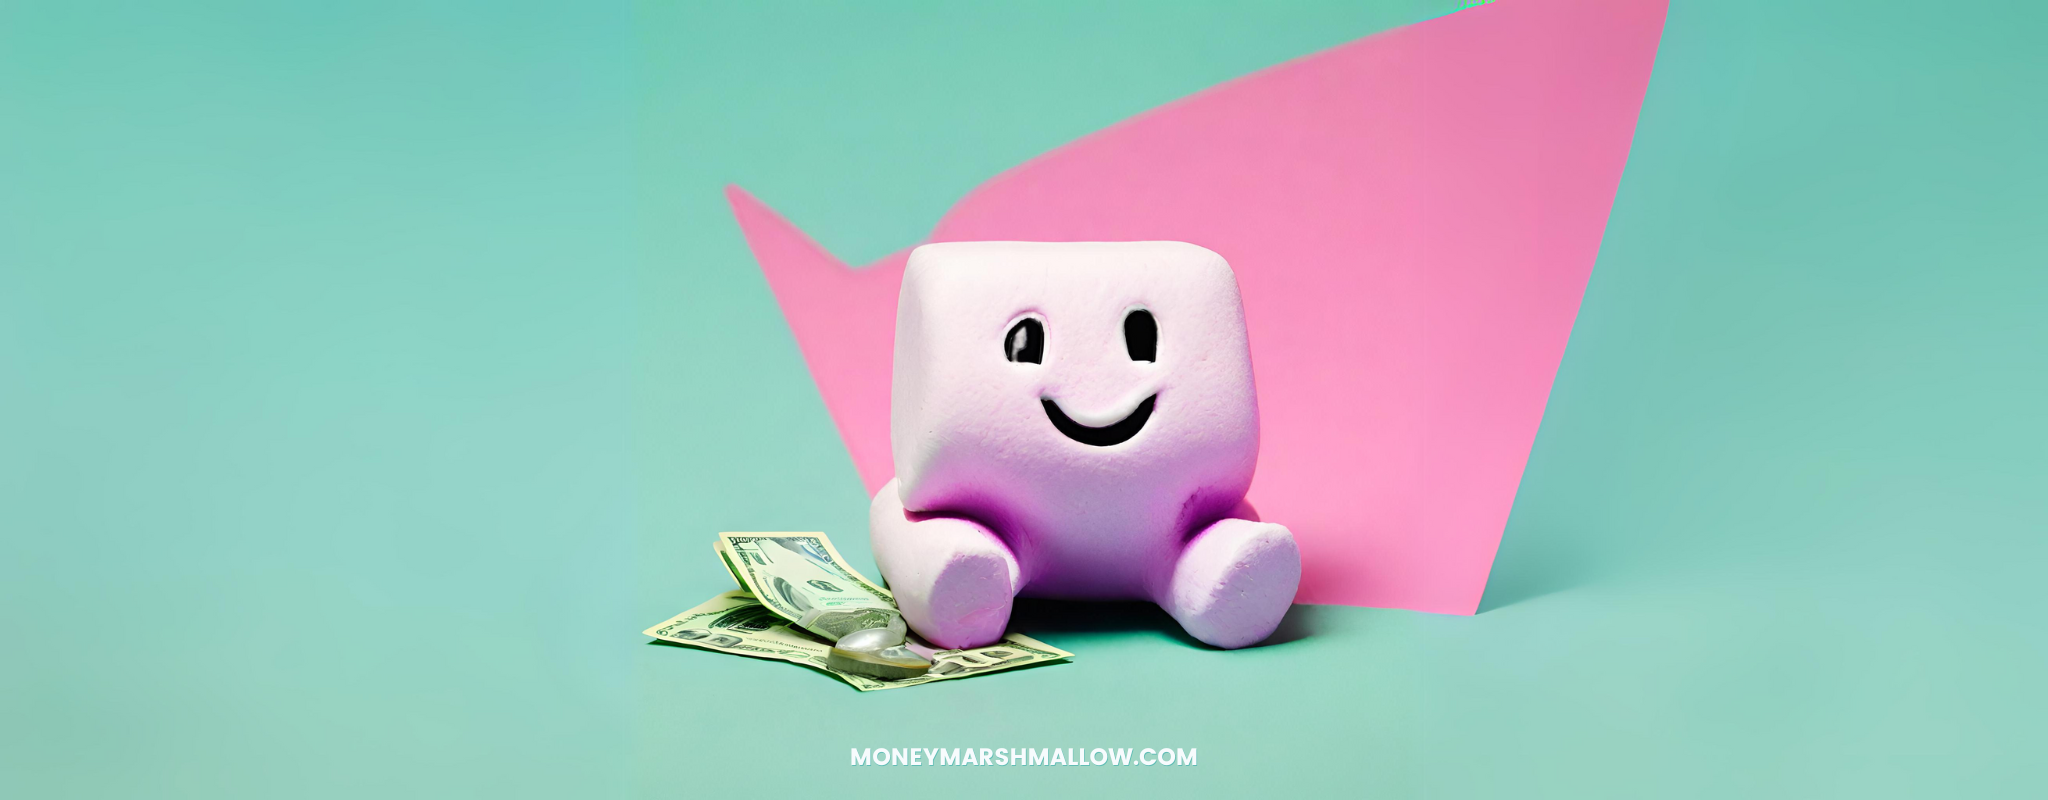 Money Marshmallow Homepage Cover